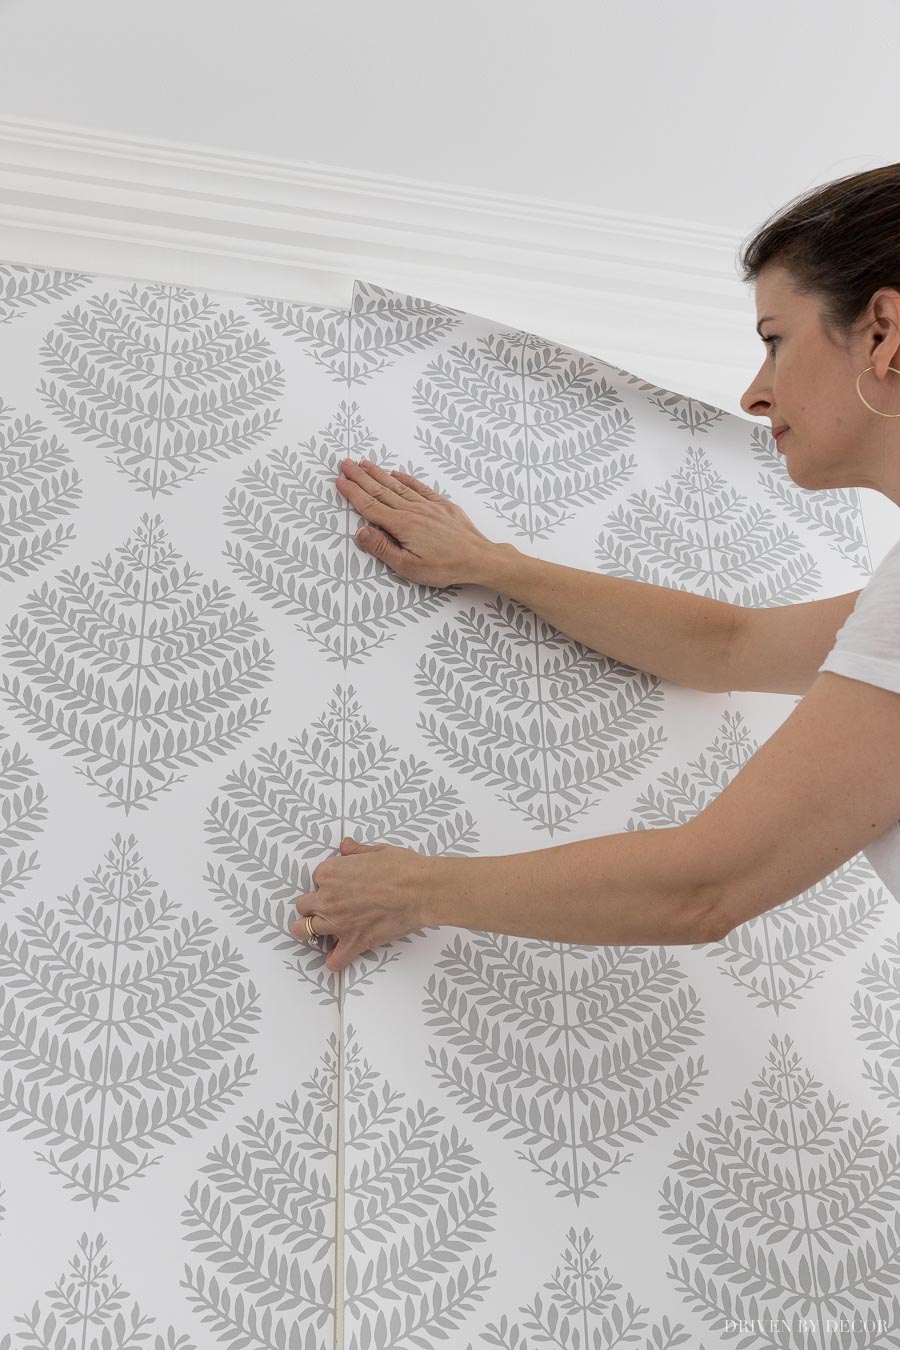 Removable Wallpaper, How to Install Peel and Stick Wallpaper